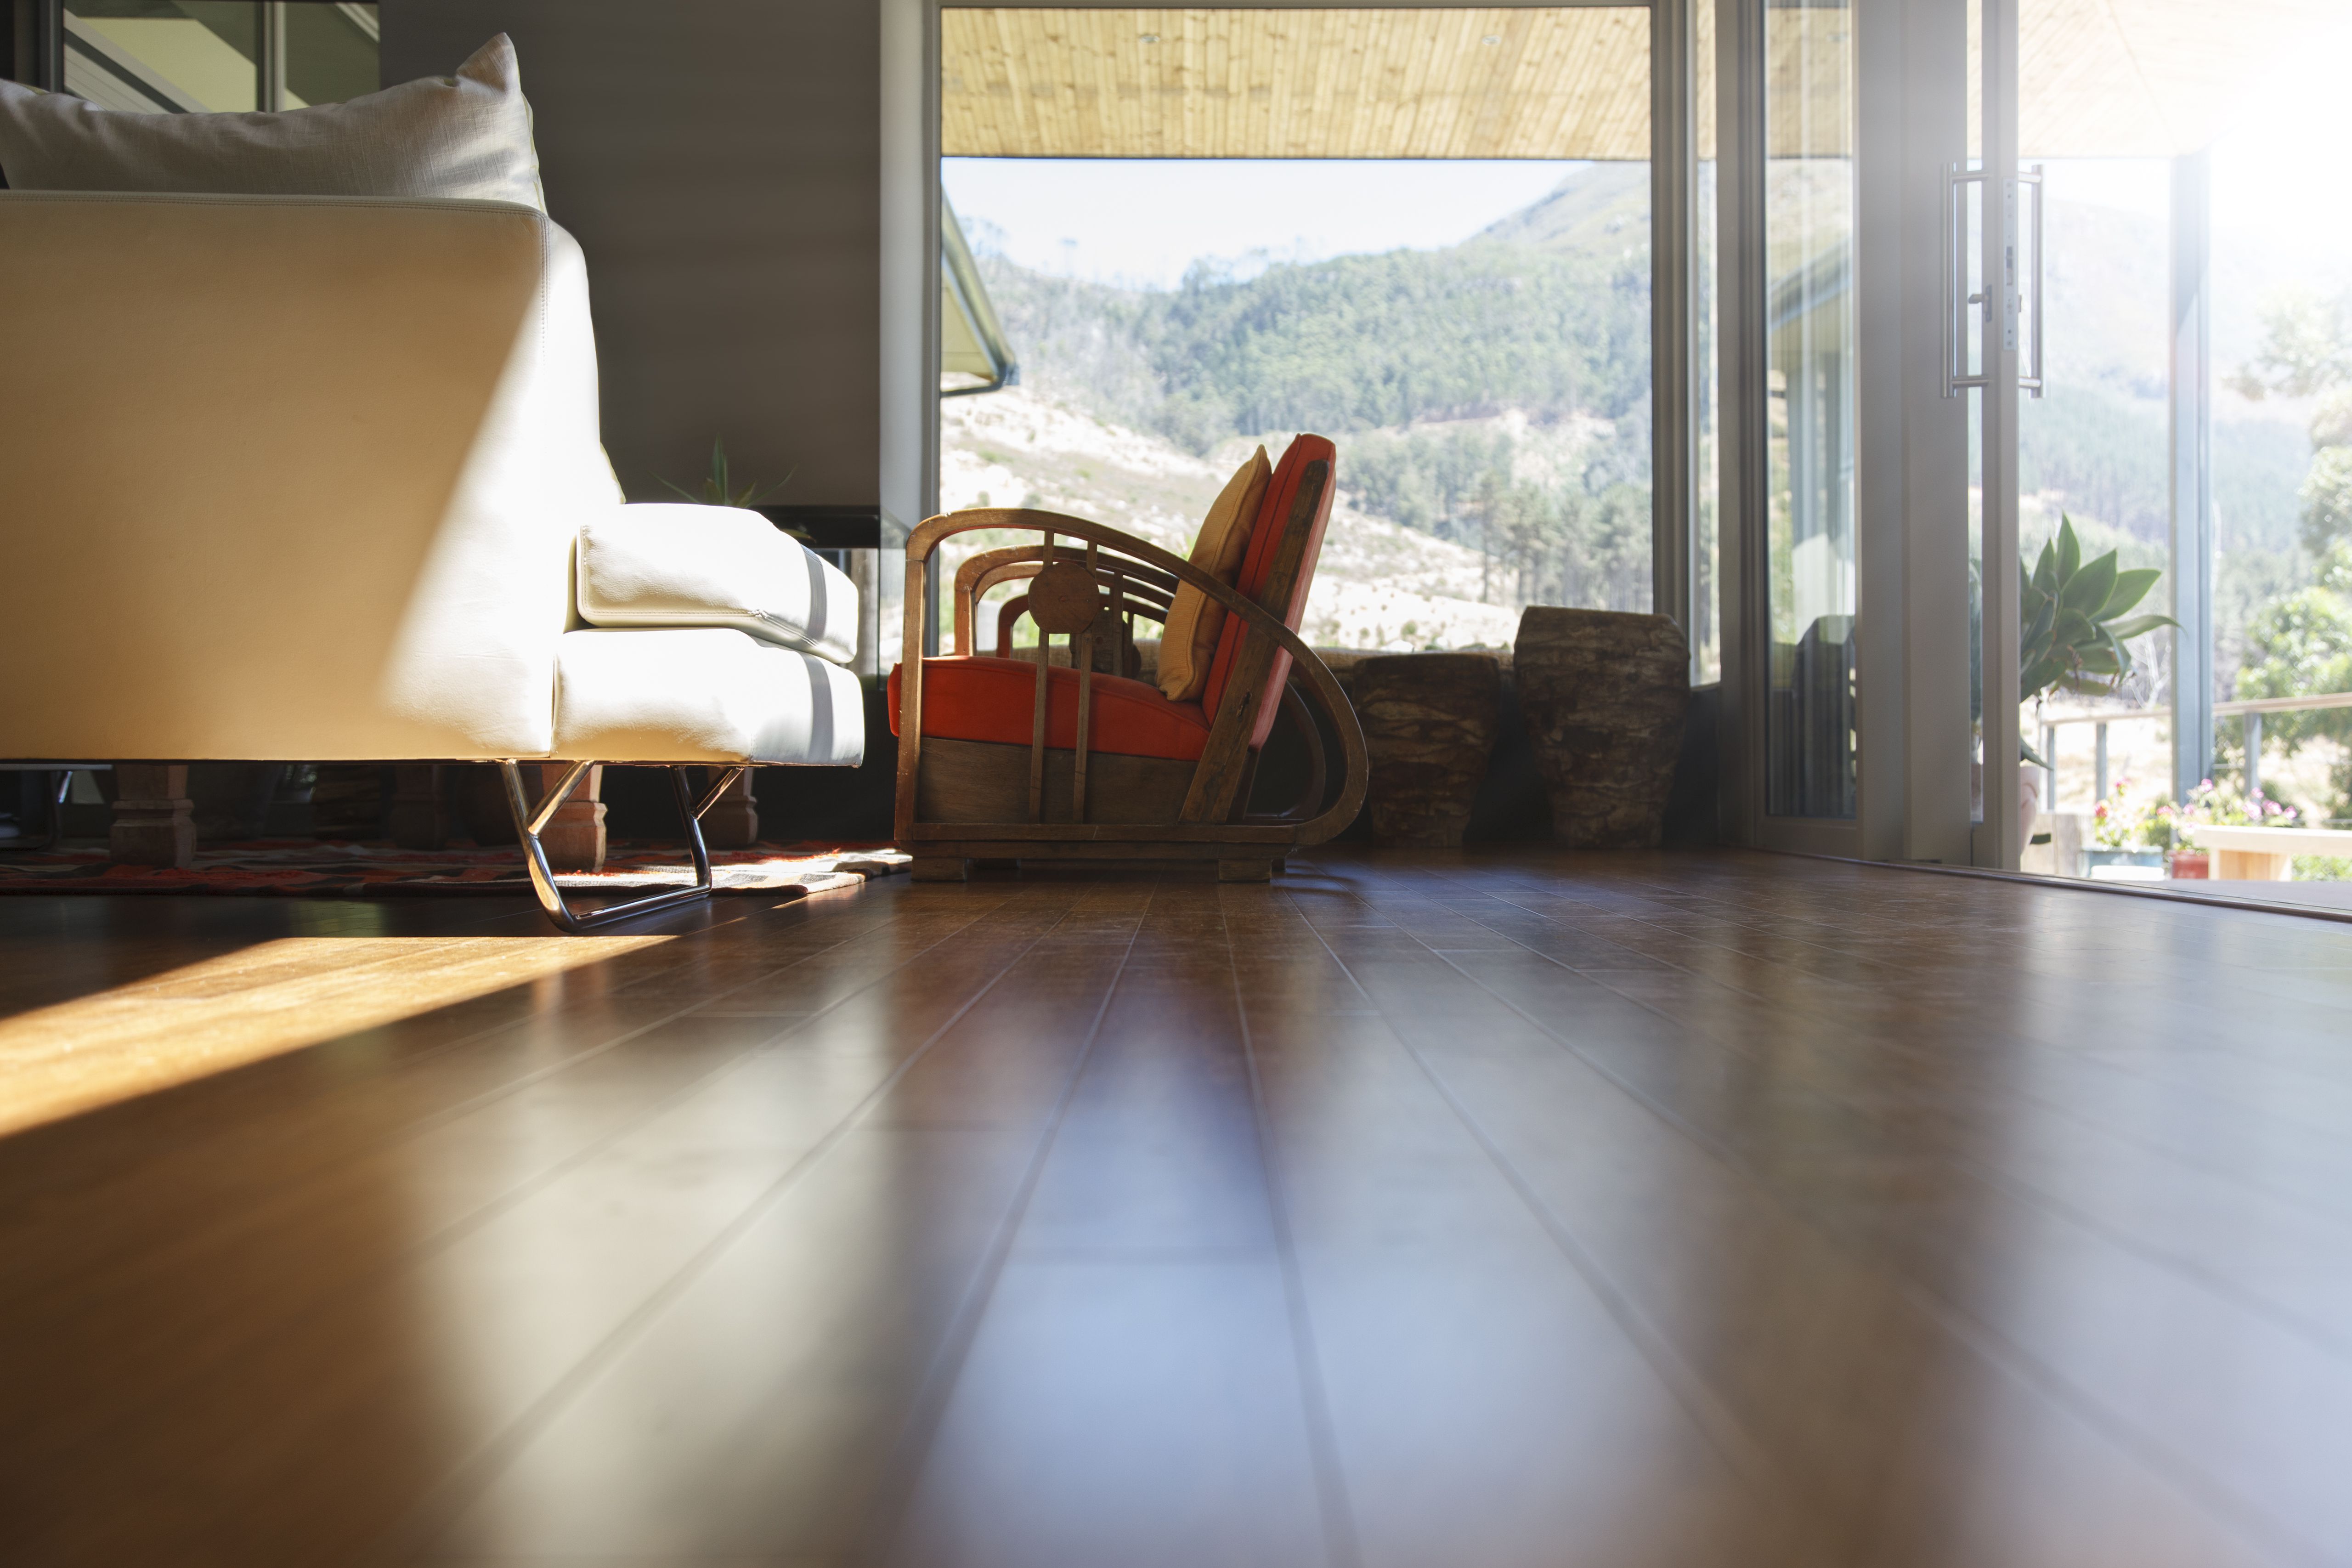 Debunking Myths About Wide Plank Flooring